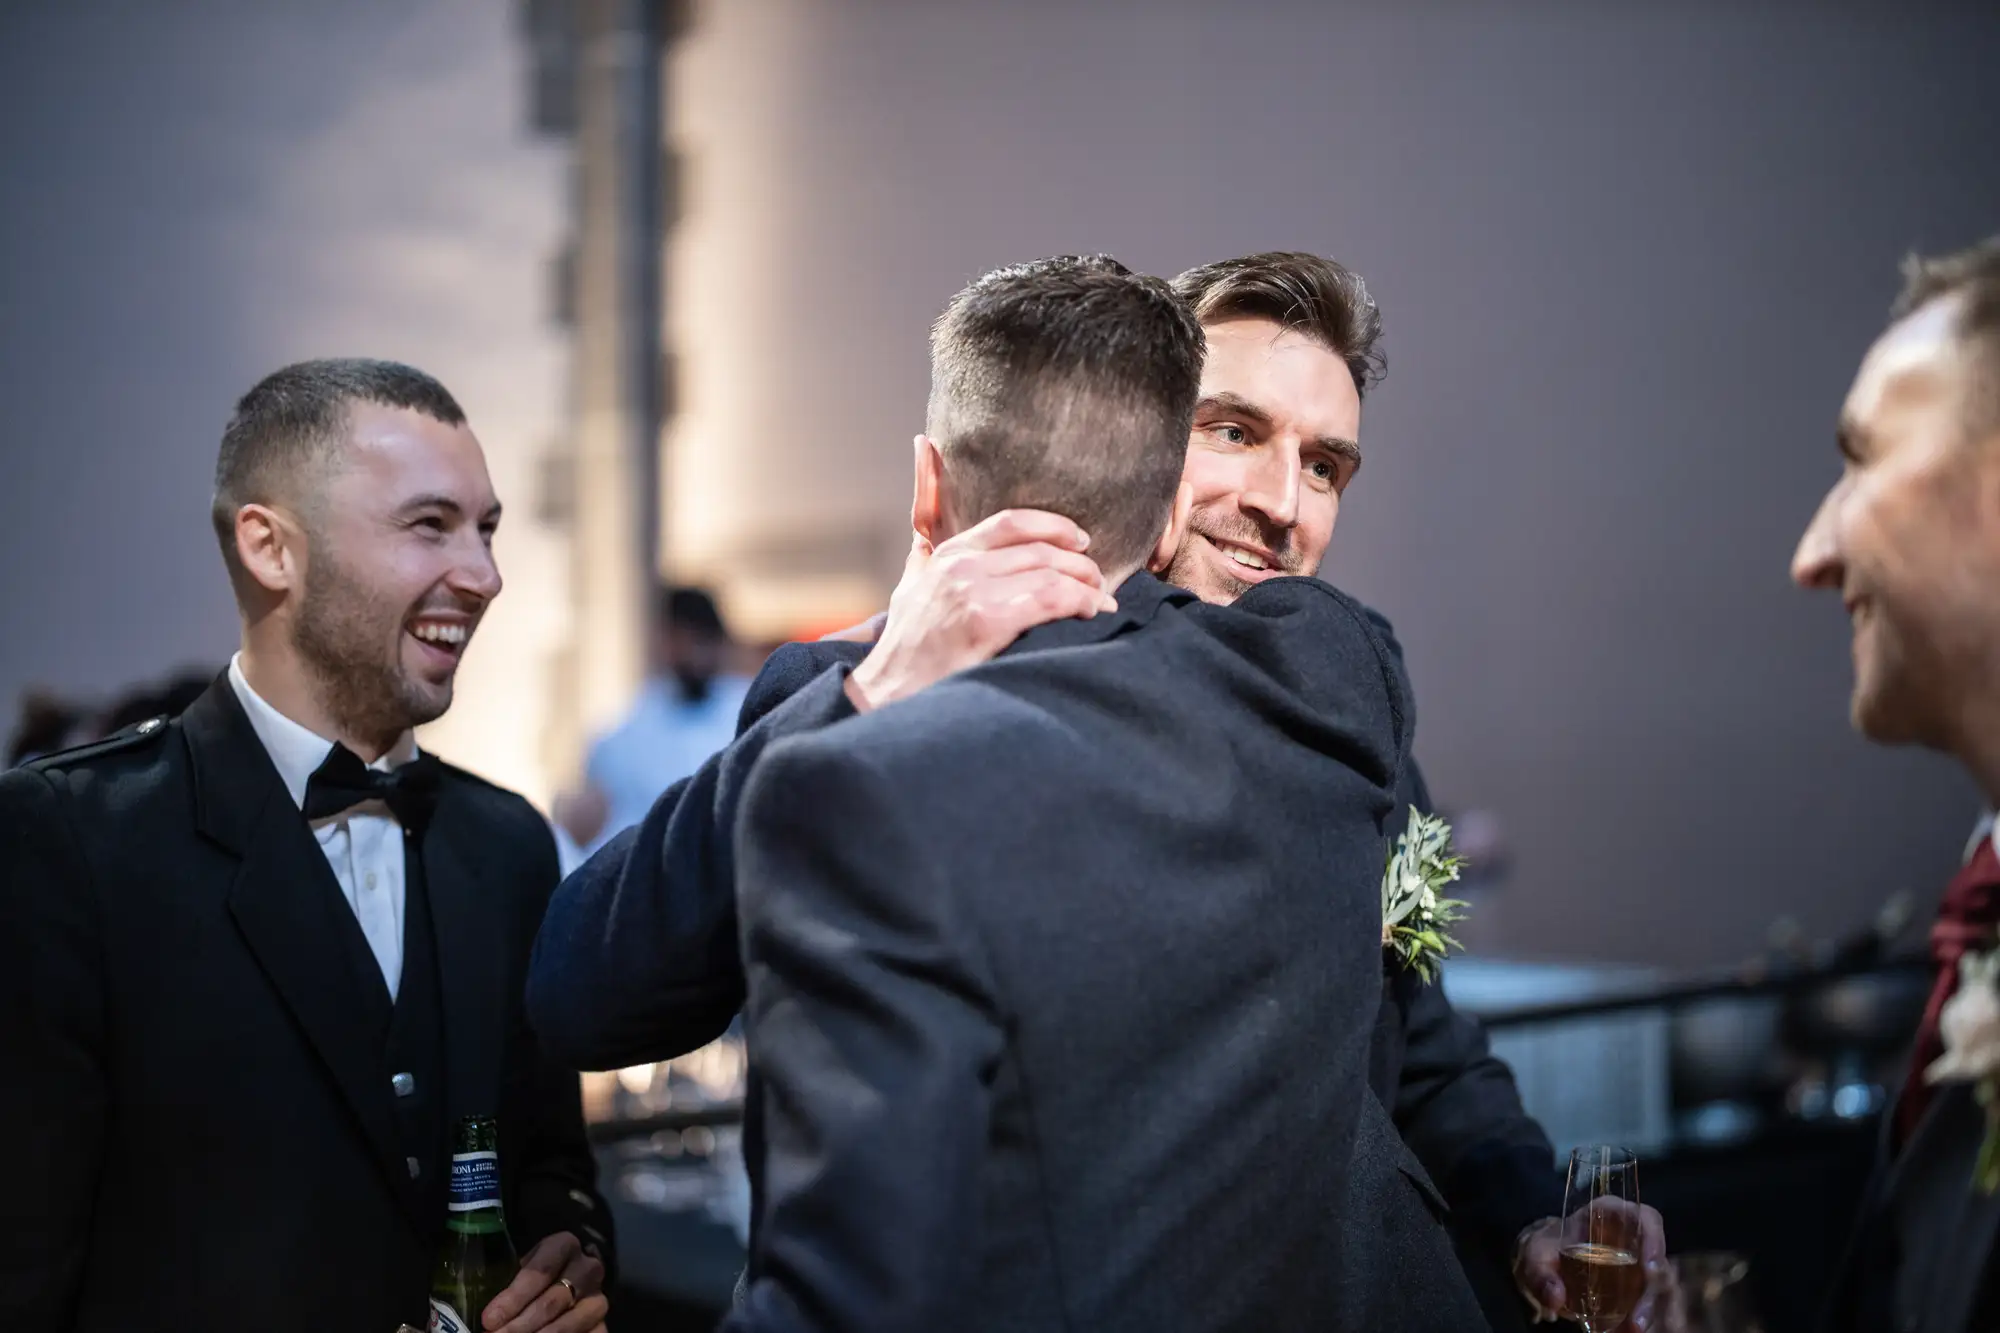 Three men in formal attire at a social event, one embracing another while the third smiles, all engaged in a joyful conversation.